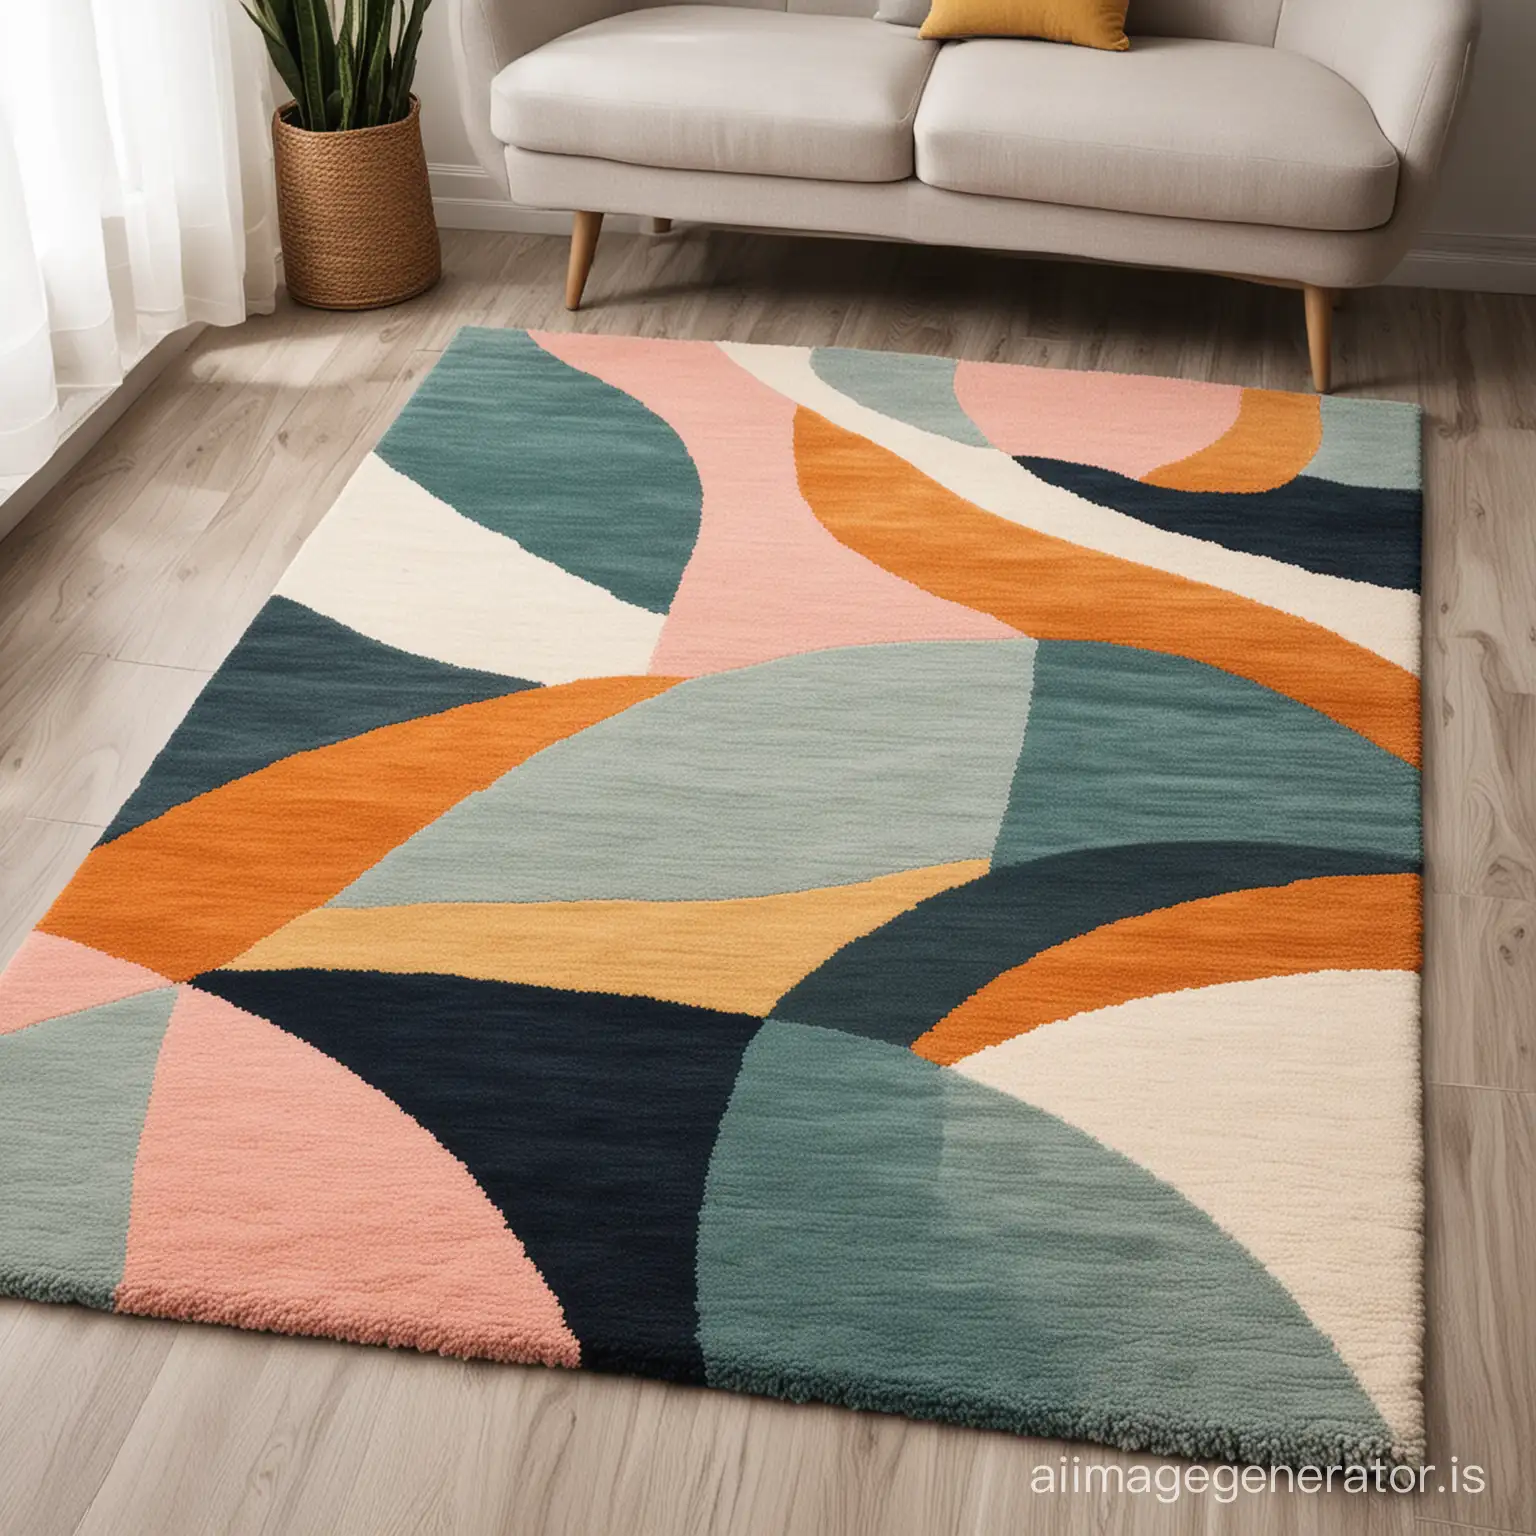 Contemporary-Abstract-Handtufted-Rugs-with-Irregular-Shapes